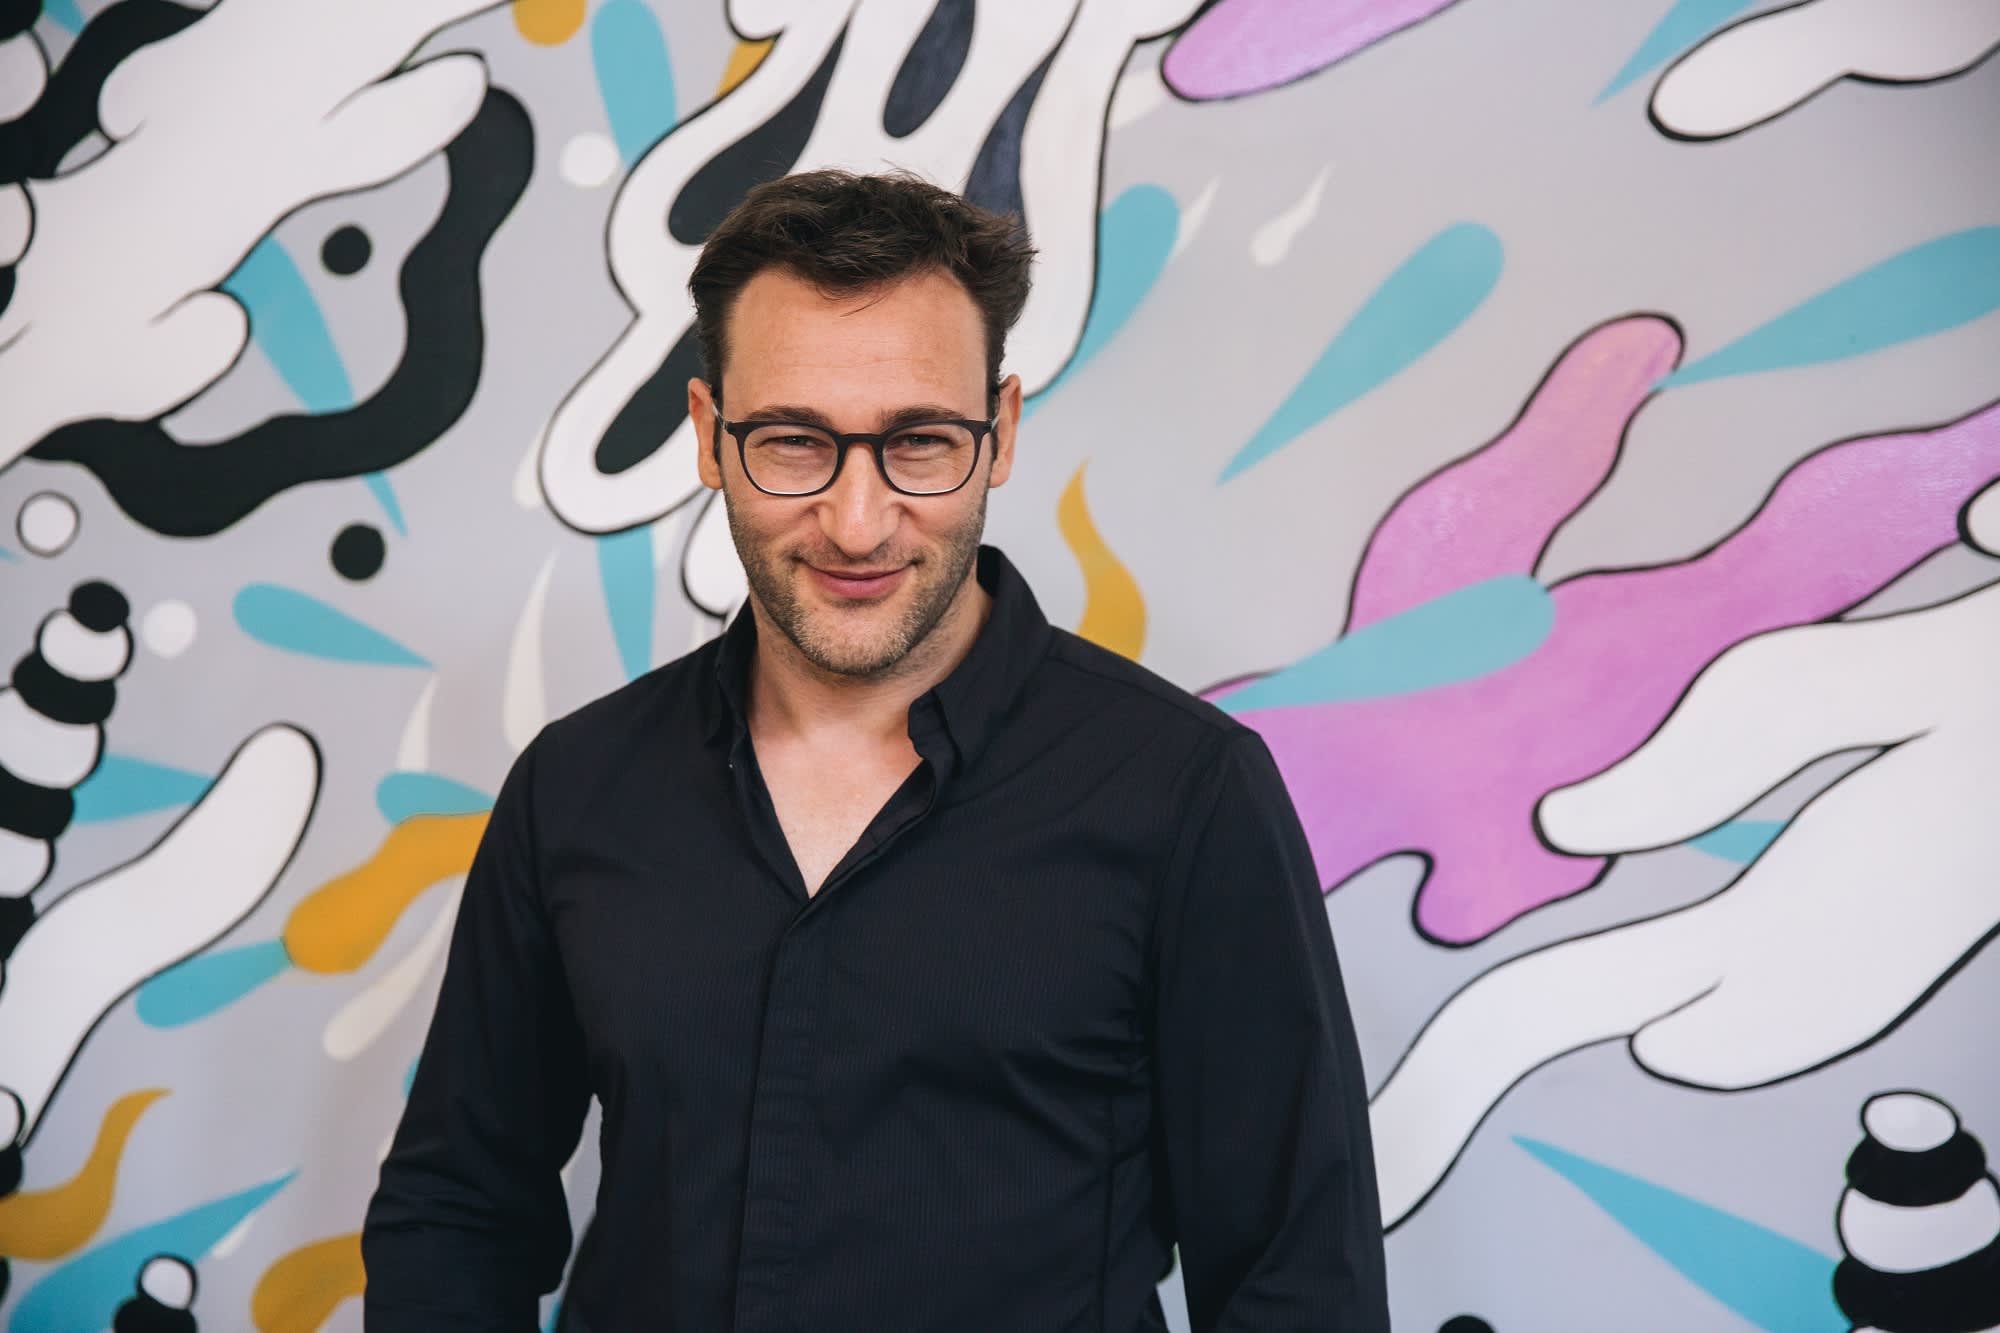 Simon Sinek: To be successful, you should sometimes 'lie to get what